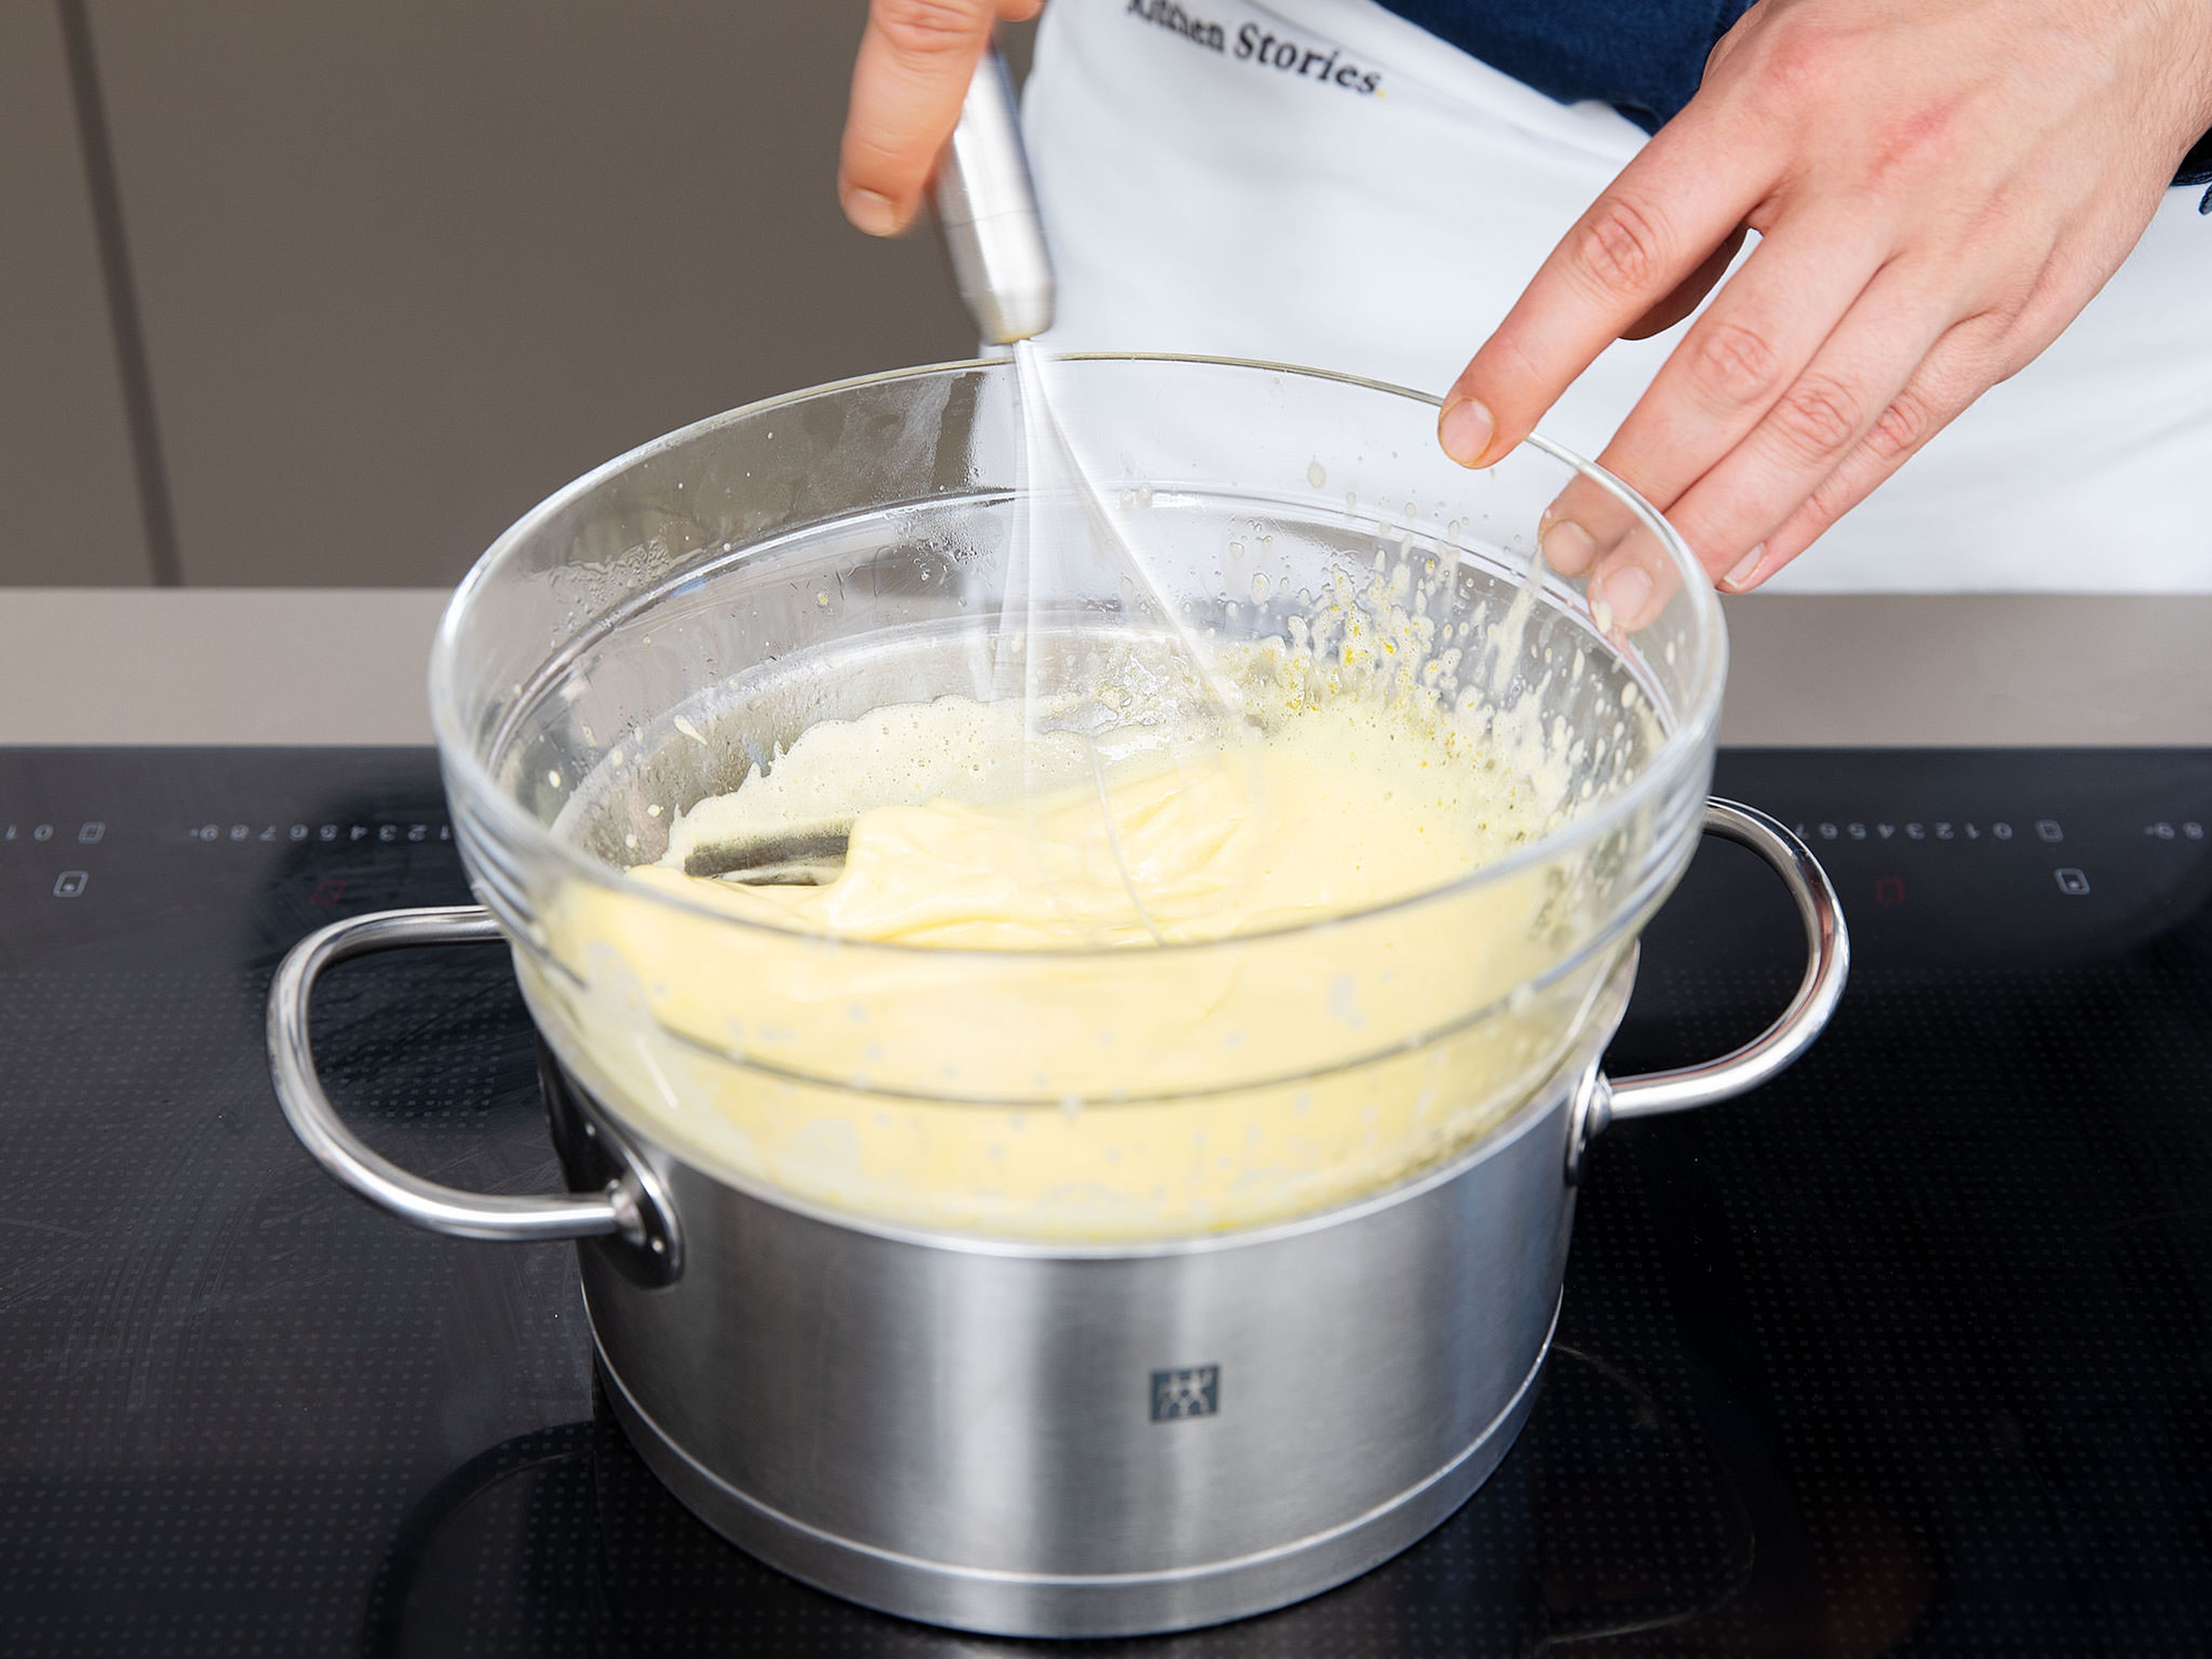 Set up a double boiler and beat the egg yolks and white sugar over a water bath until creamy.